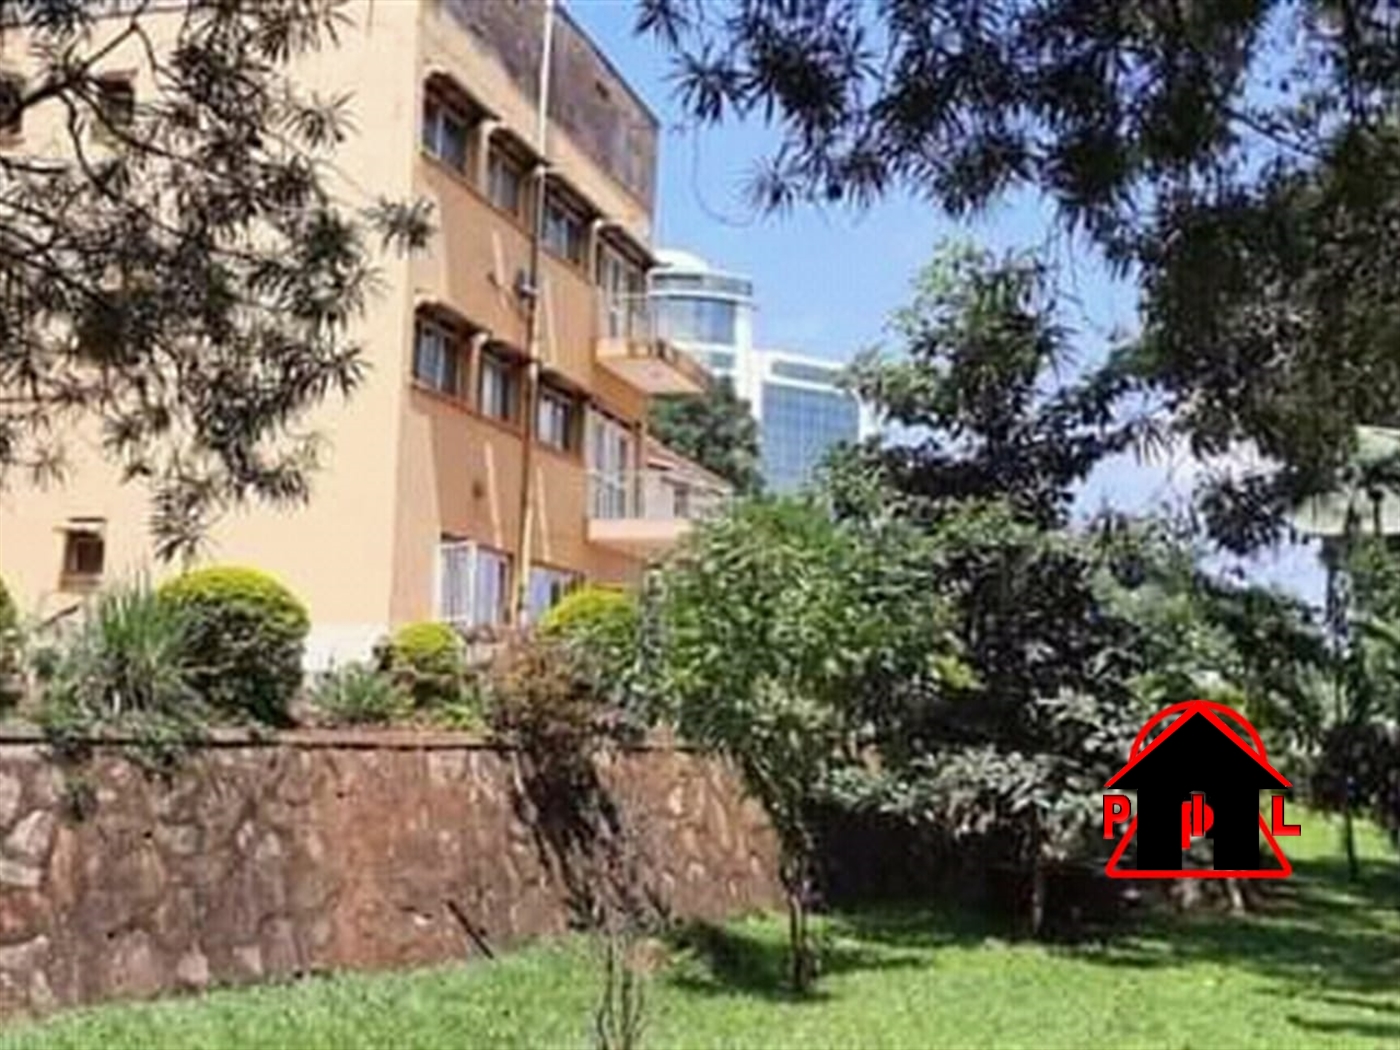 Commercial Land for sale in Nakasero Kampala